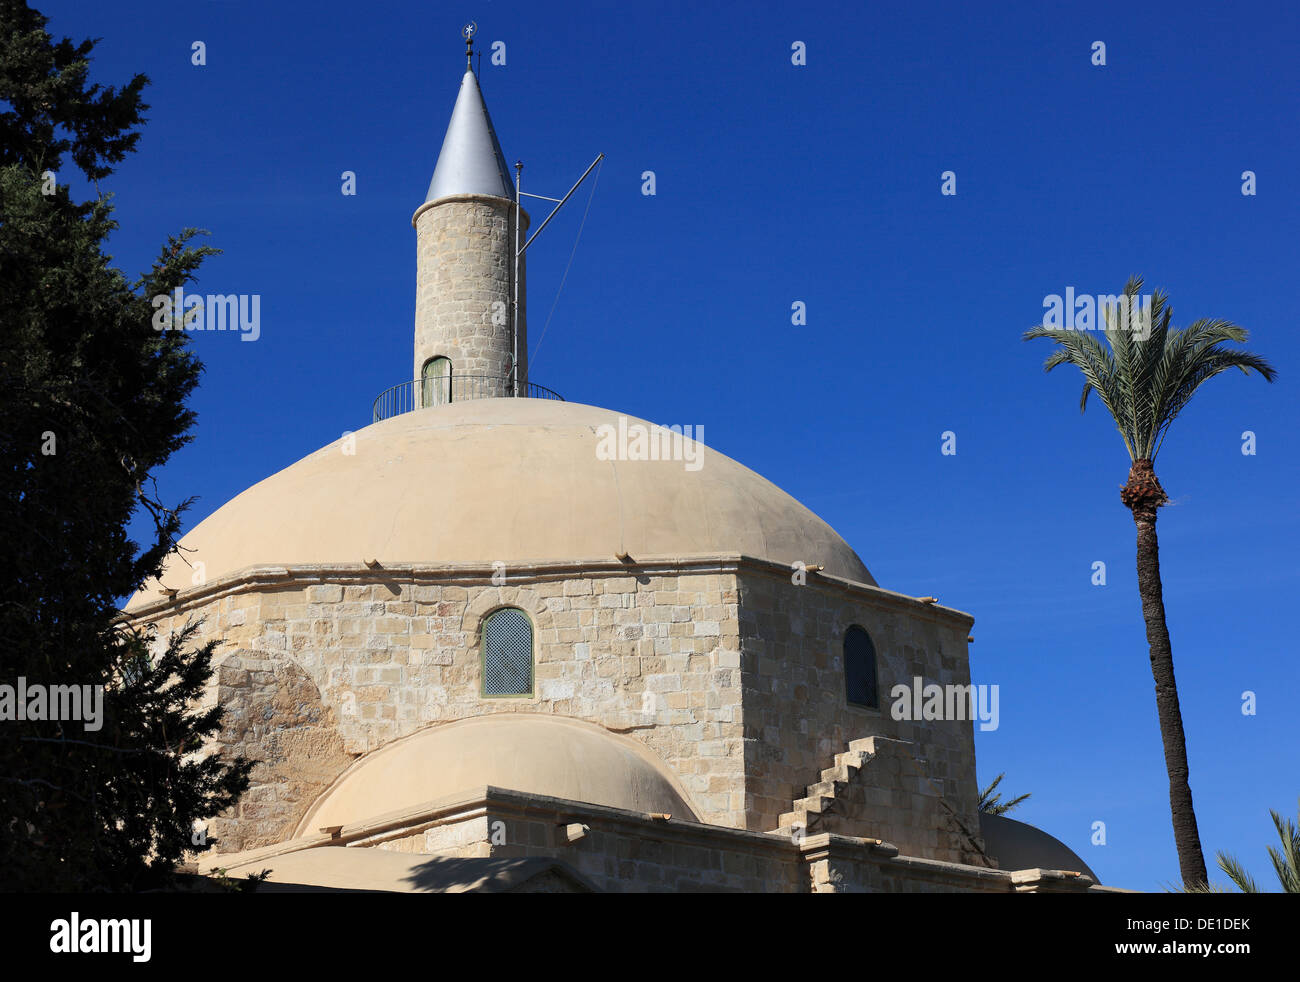 Cyprus, Chala Sultan Tekke Mosque, Hala Sultan Tekke Mosque built in 1816 is a salt lake of the same name. It is located about 5 Stock Photo